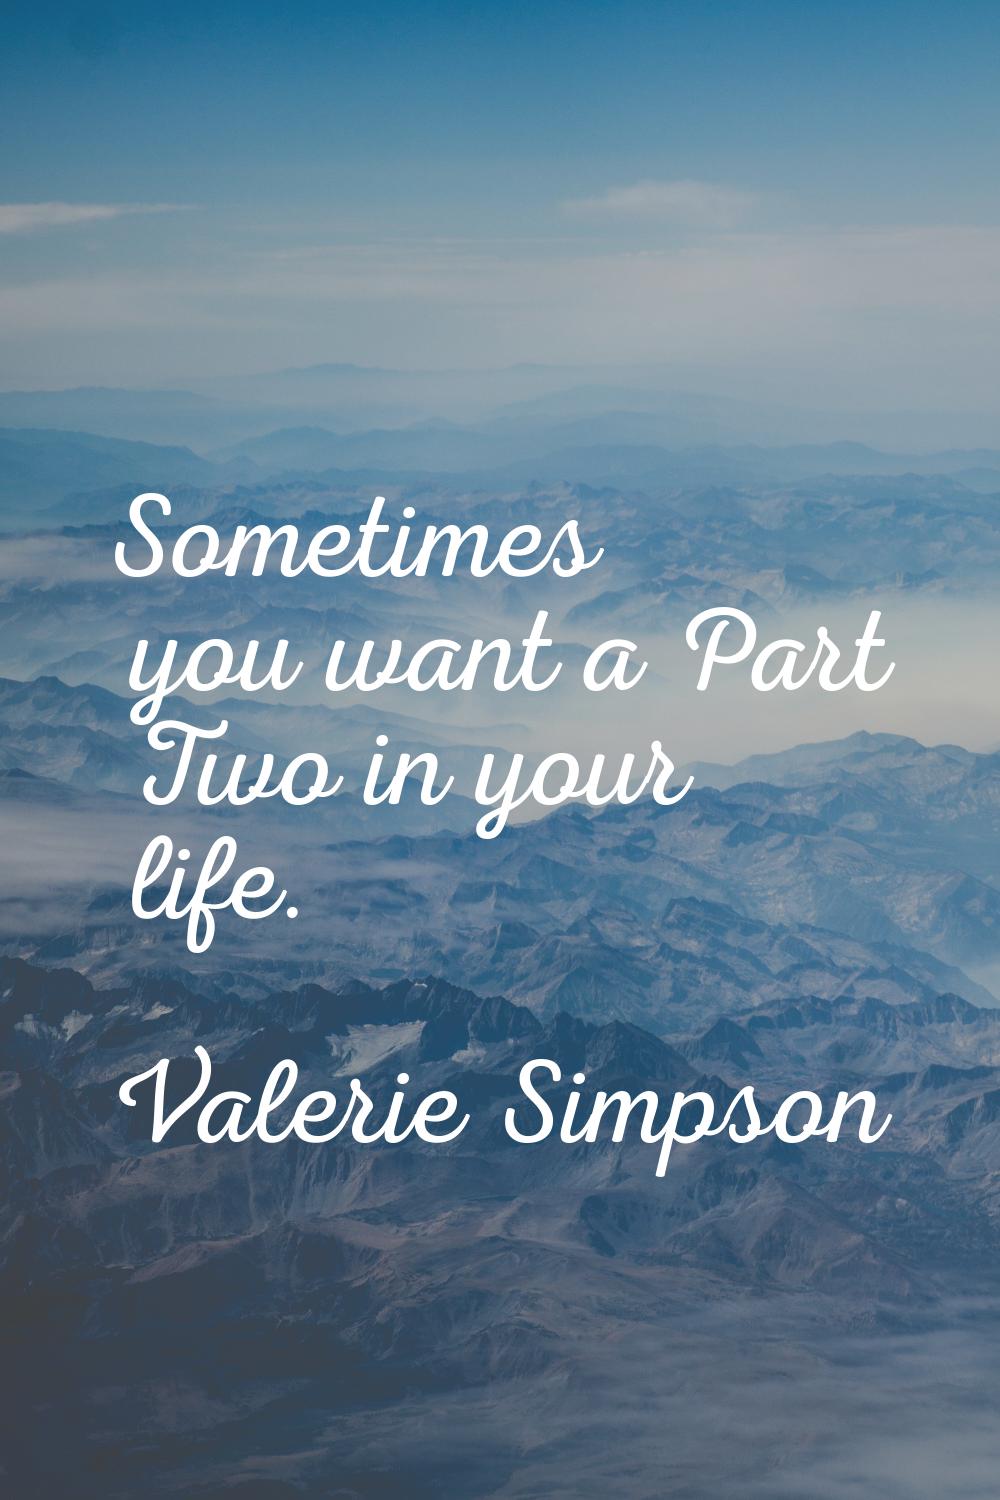 Sometimes you want a Part Two in your life.